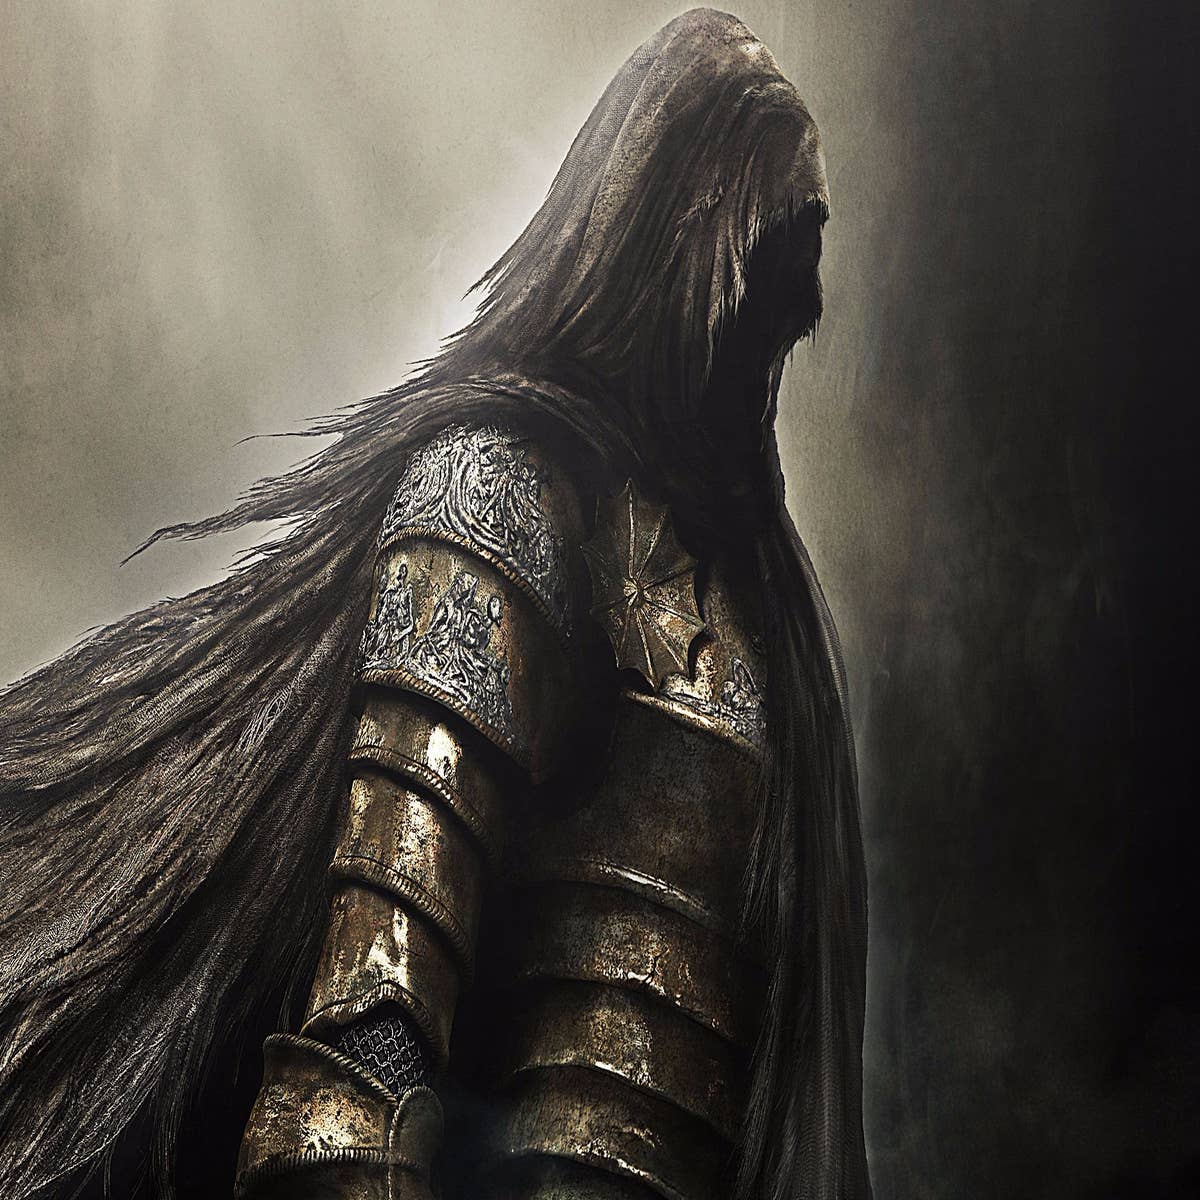 Dark Souls II: OUT NOW! Very high notes across the board. An